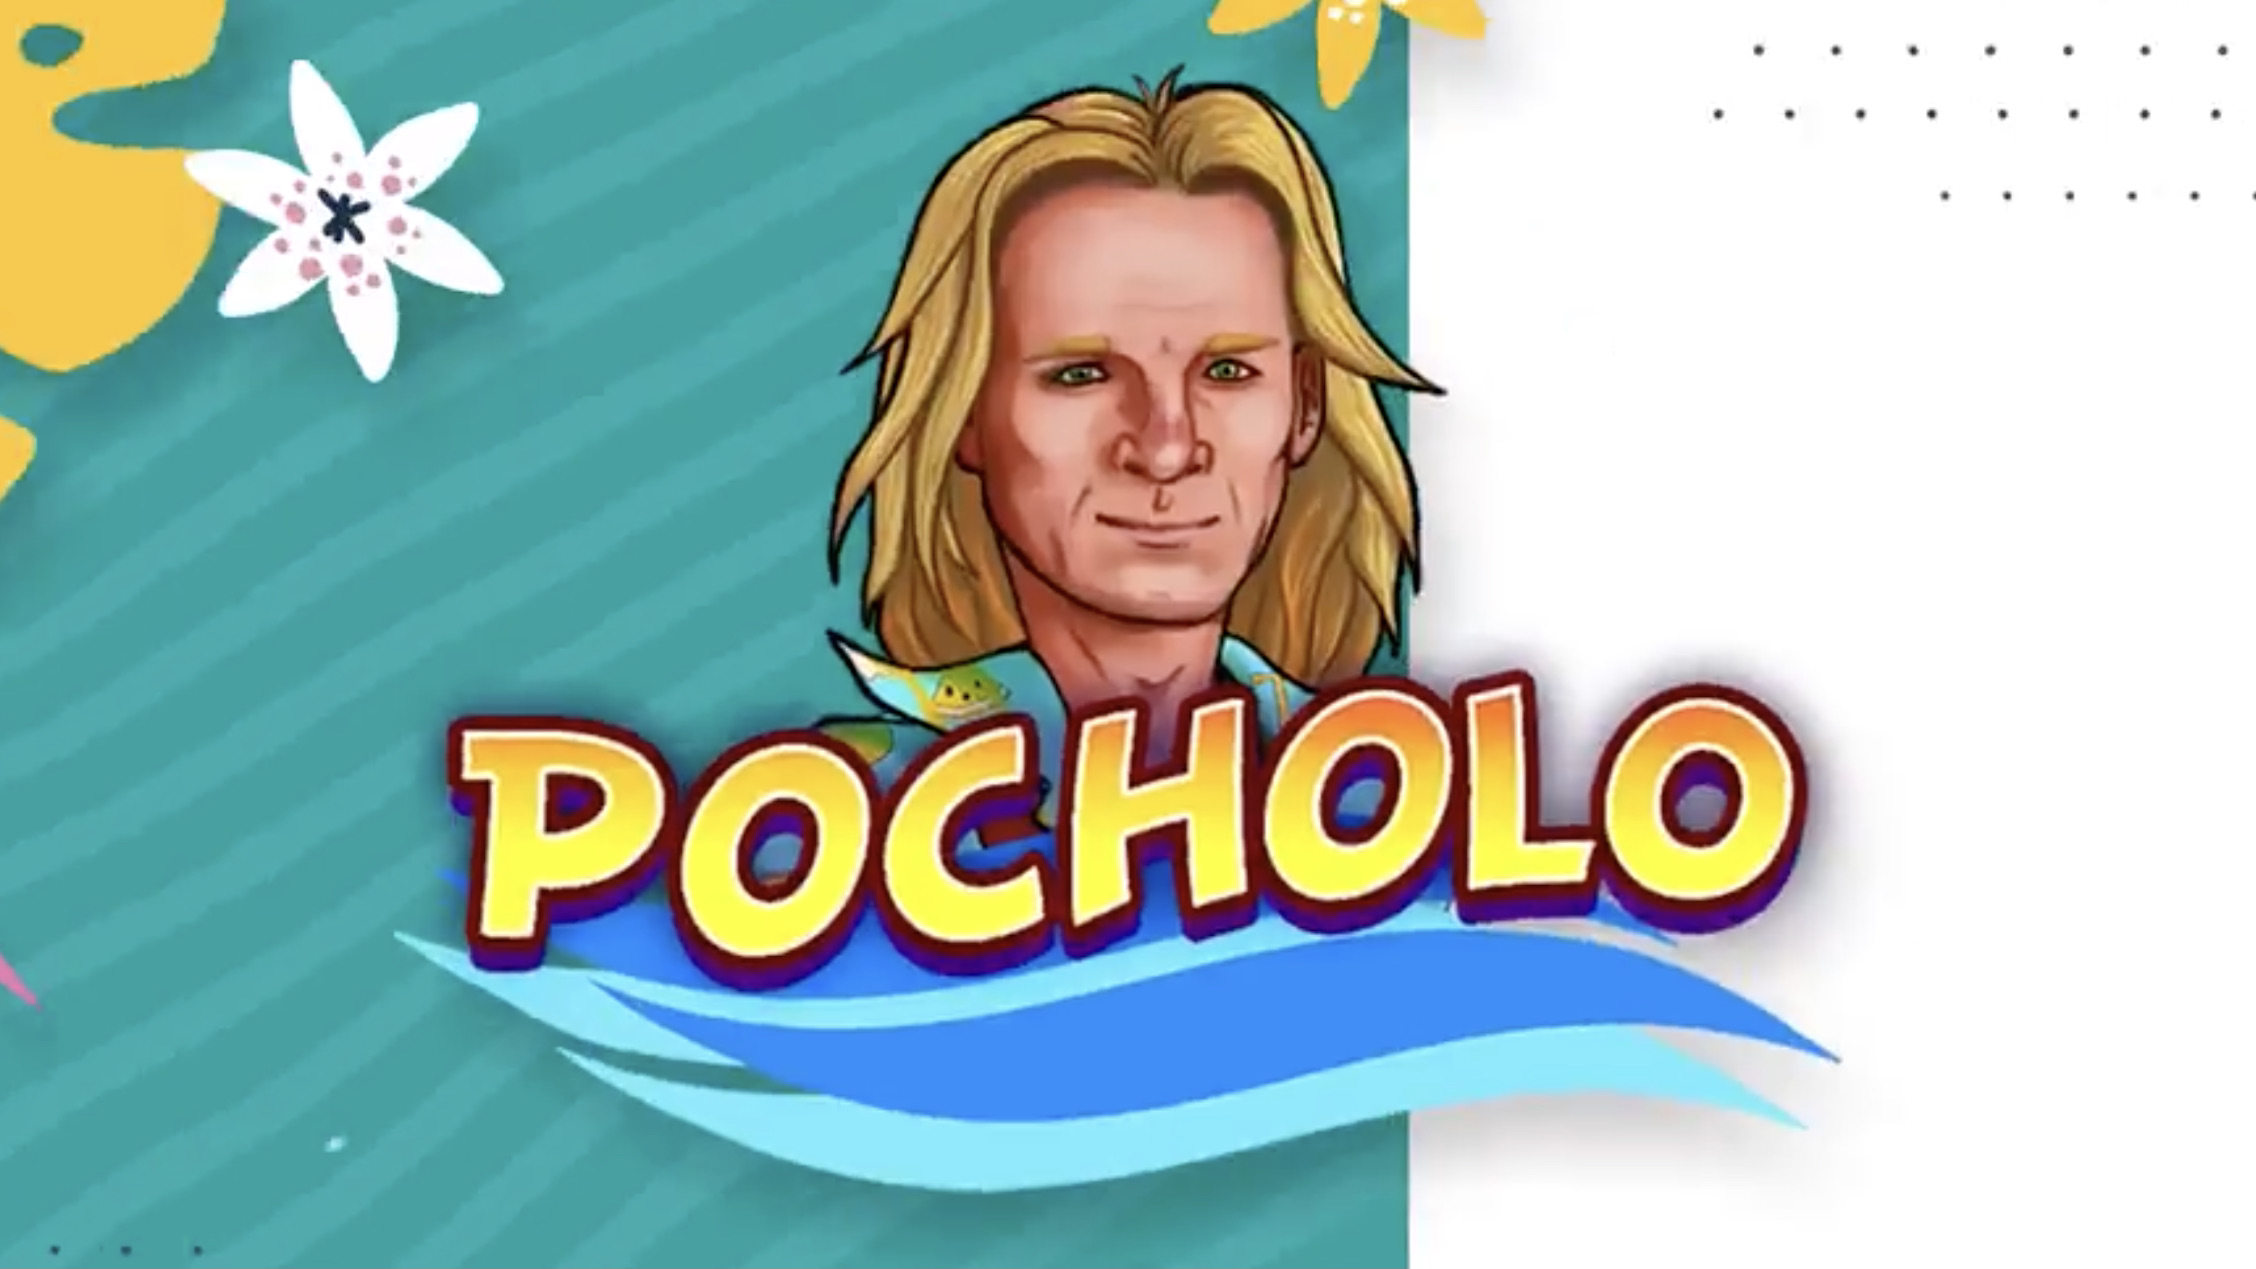 Pocholo is a 3x3, nine-payline video slot that comes with a maximum win potential of up to x1,000 the bet.